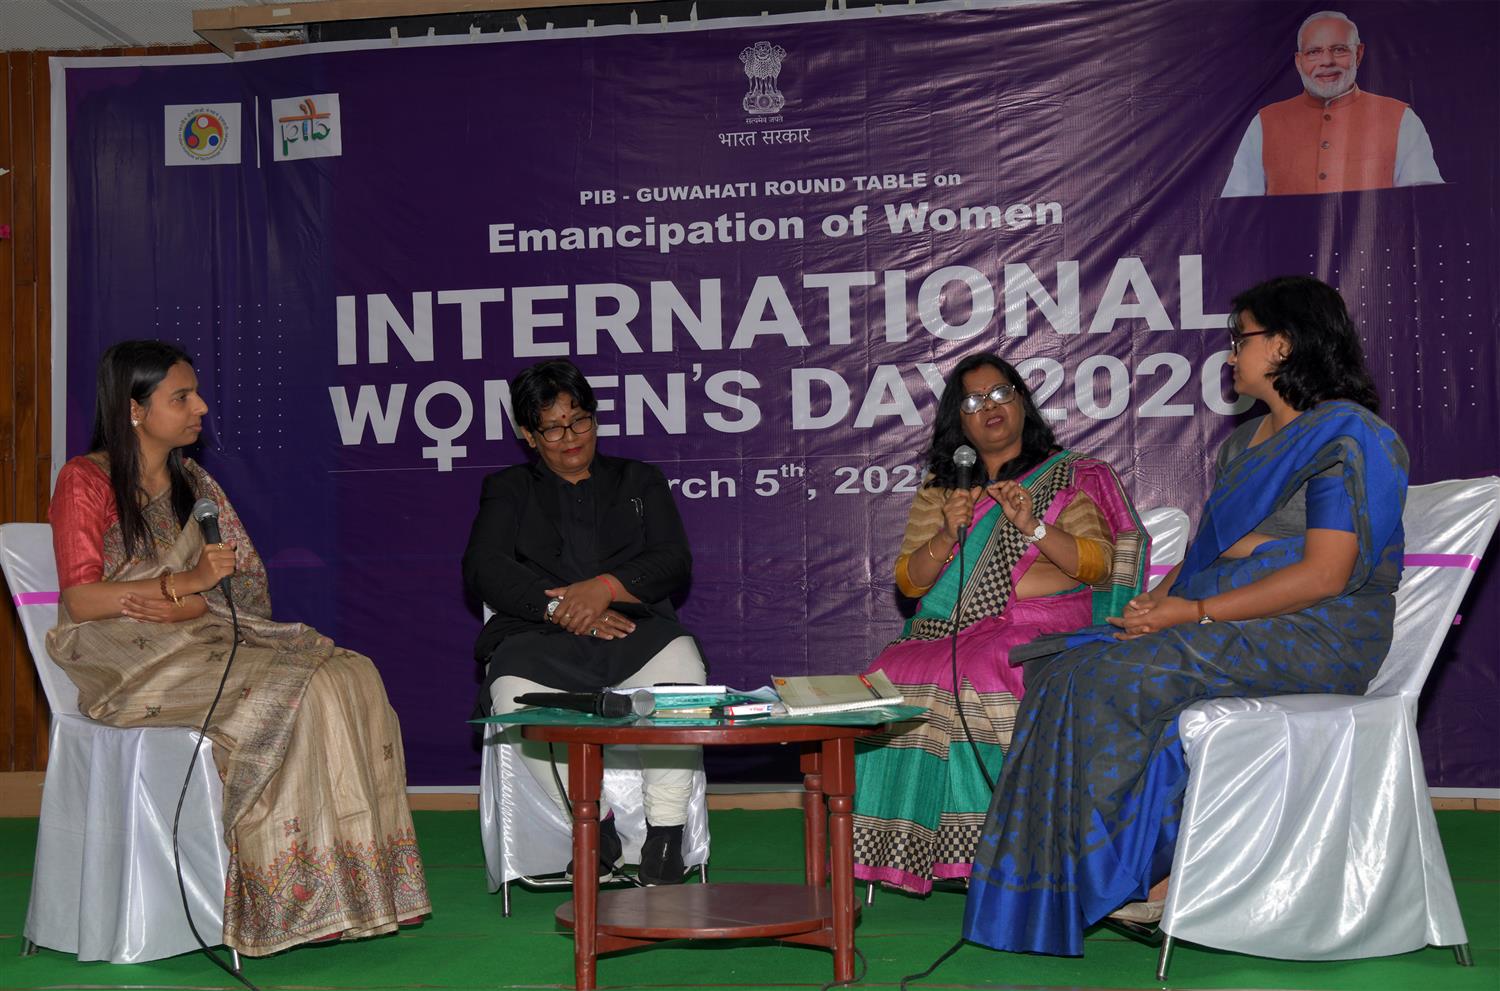 Smt. Sumitra Sharma, Advocate Smt. Mili Hazarika, Senior Advocate Smt. Durba Dutta Lecturer, Royal Golobal University and Dr. Rajshree Bedamatta Associate Prof.IIT, Guwahati and keeriti Tiwari Join Director, PIB Guwahatia are seen at the Round  Table conference  on Women’s Emancipation in the Run-up to International Women’s Day 2020 , organized by Press Information Bureau, Ministry of Information & Broadcasting, Guwahati in collaboration with Indian Institute of Technology, Guwahati on 5th March 2020. 